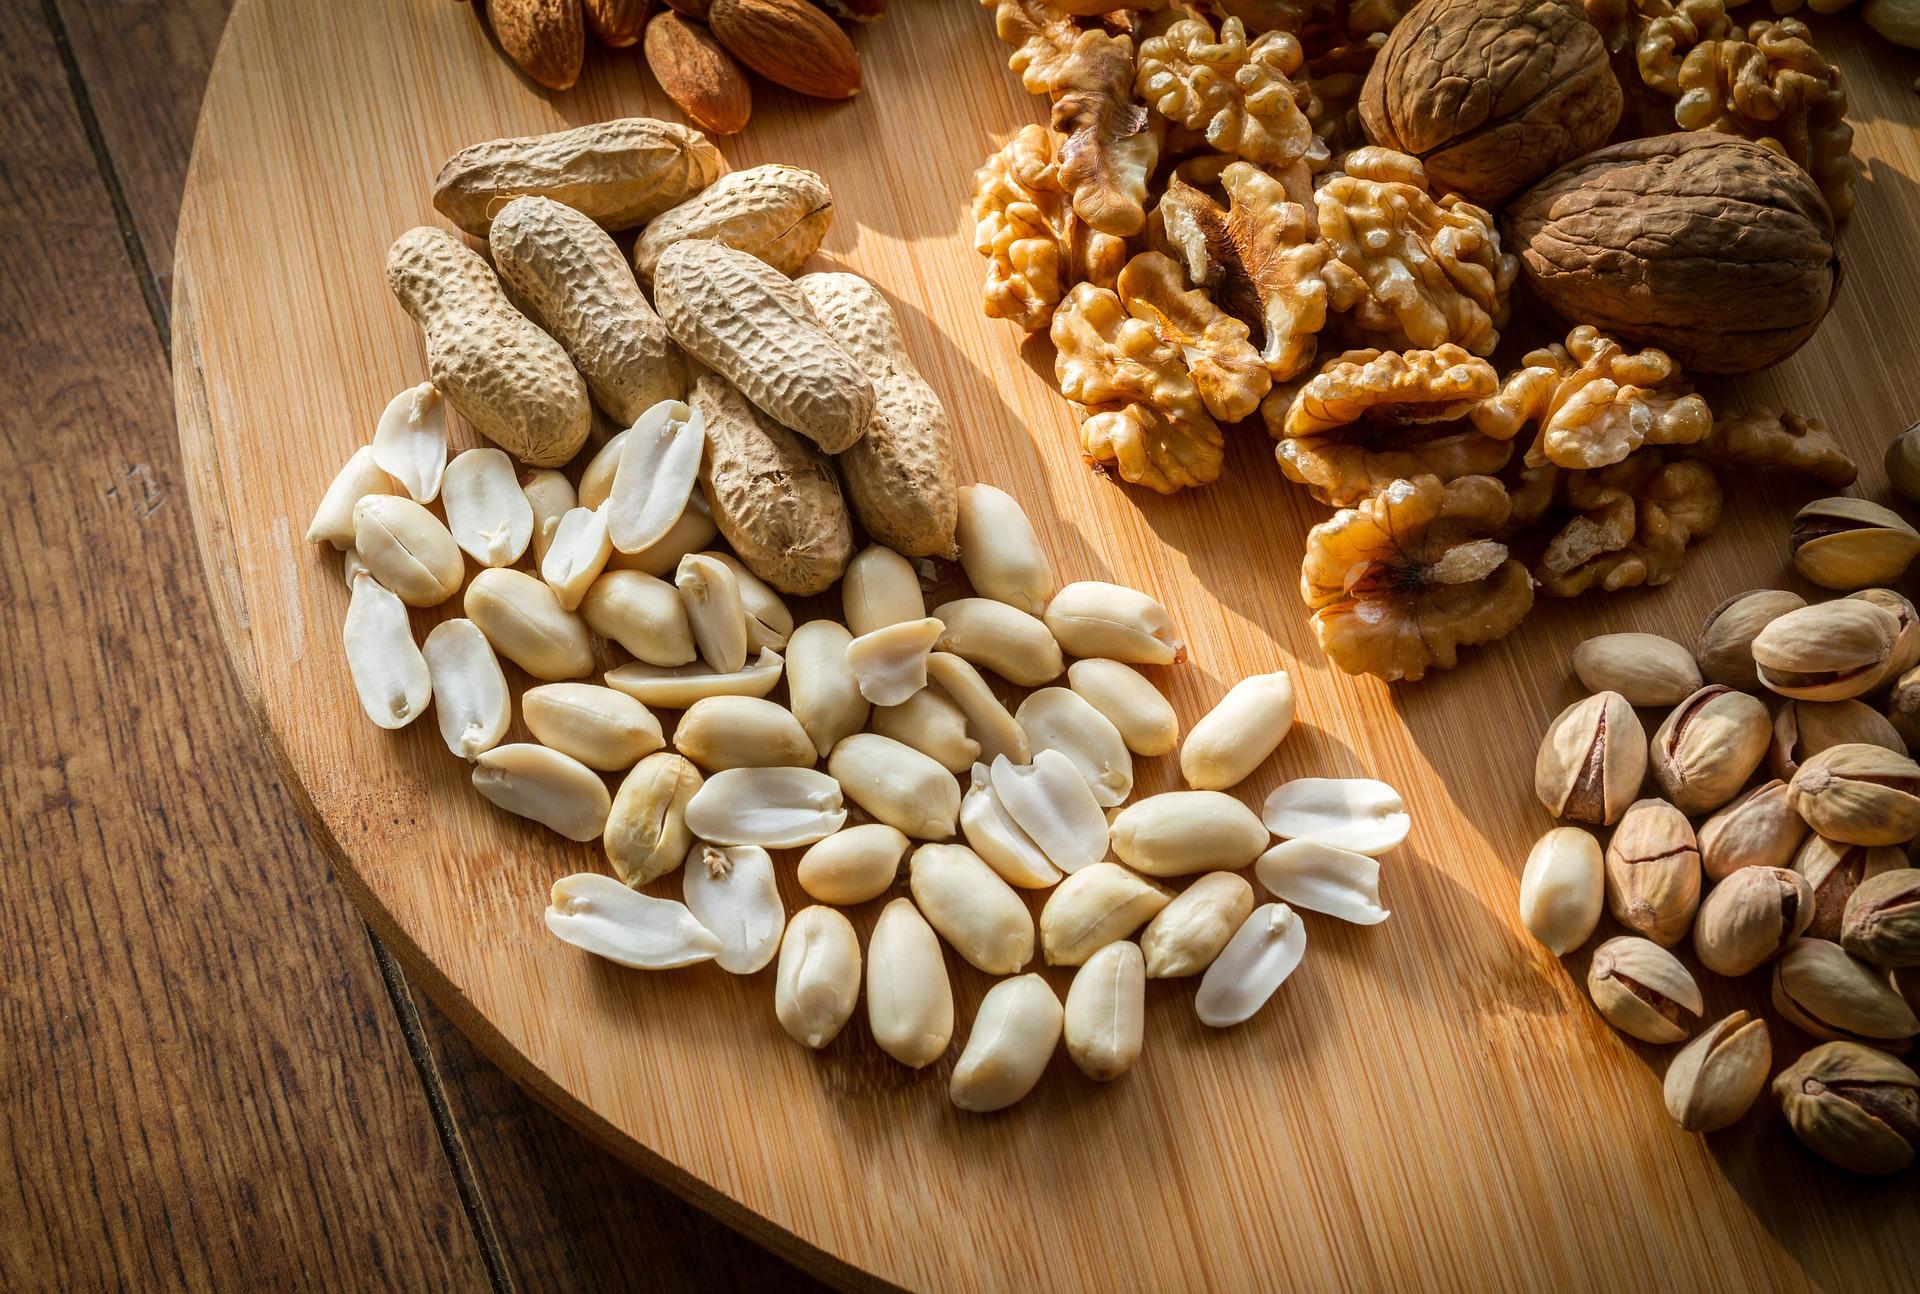 The Health Benefits of Including Nuts in your Diet